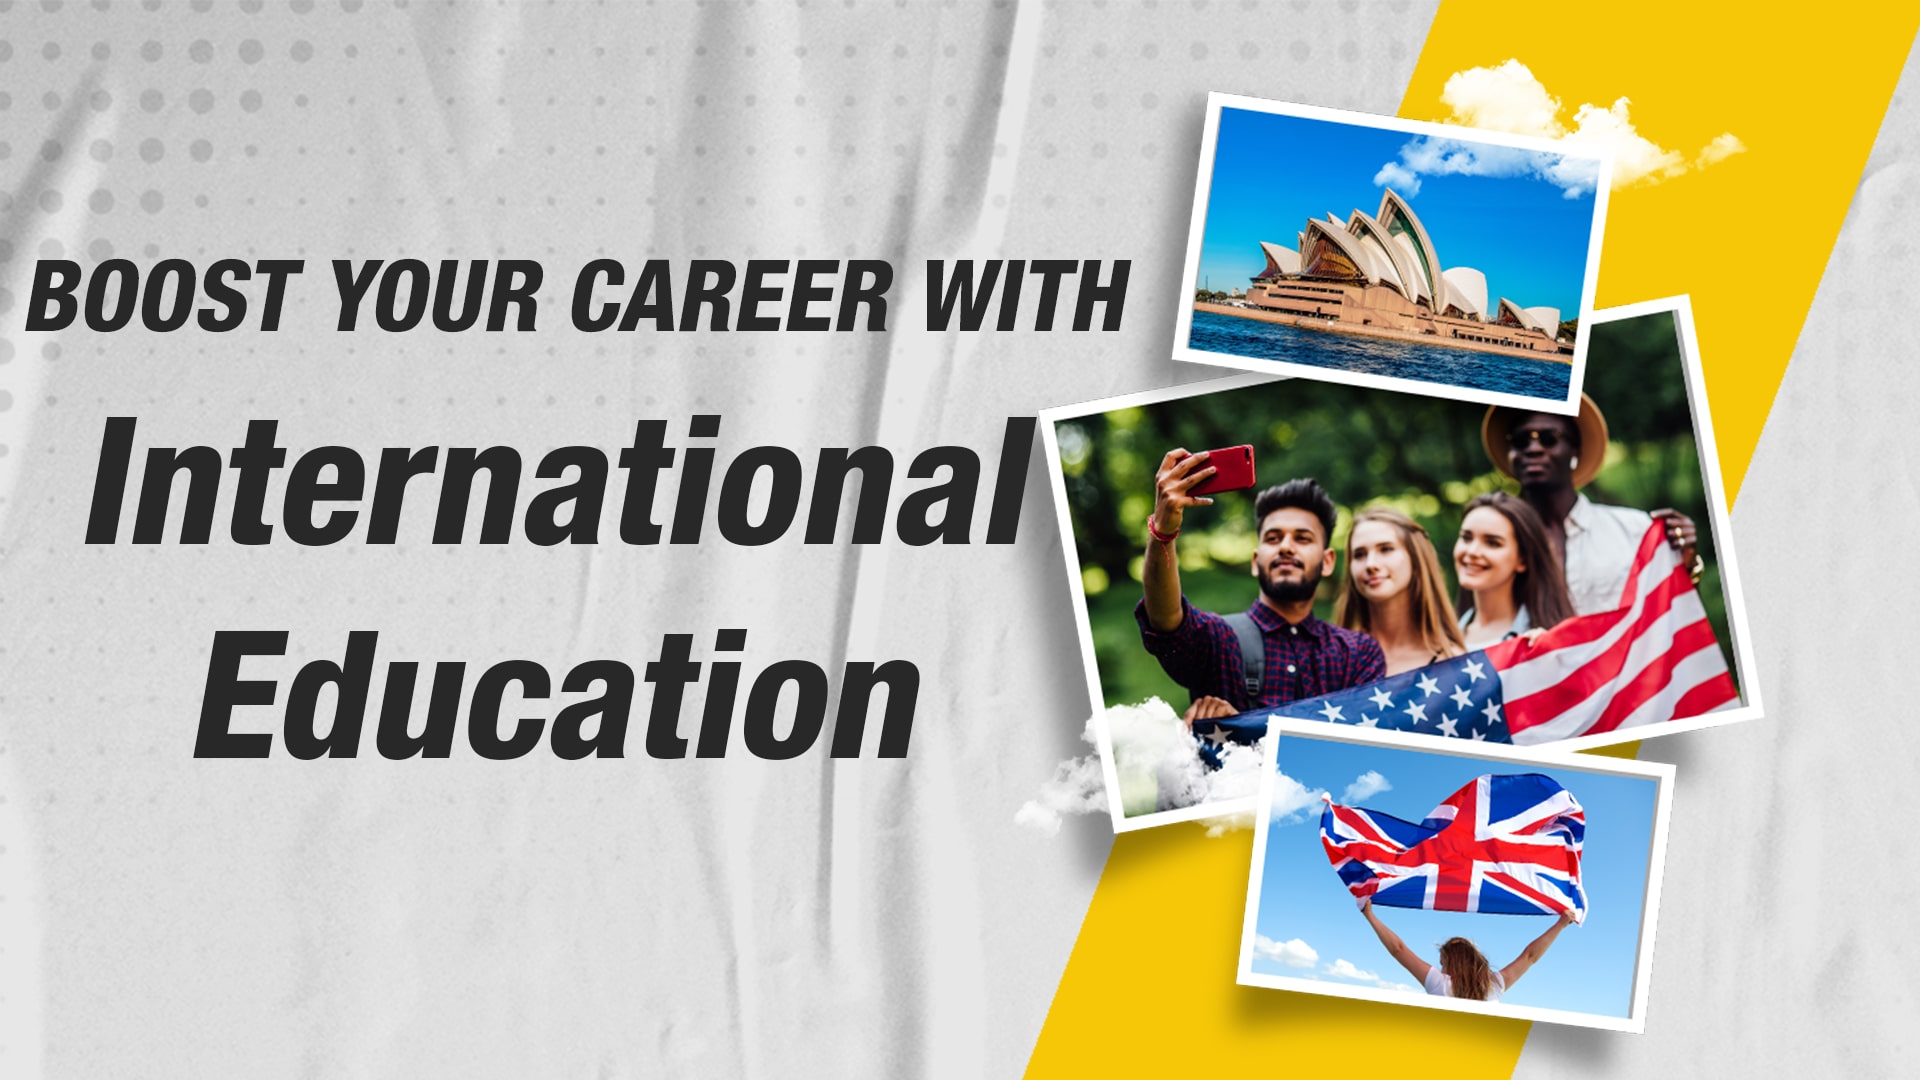 How can an International Education help you Boost Your Career in 2022-2023?